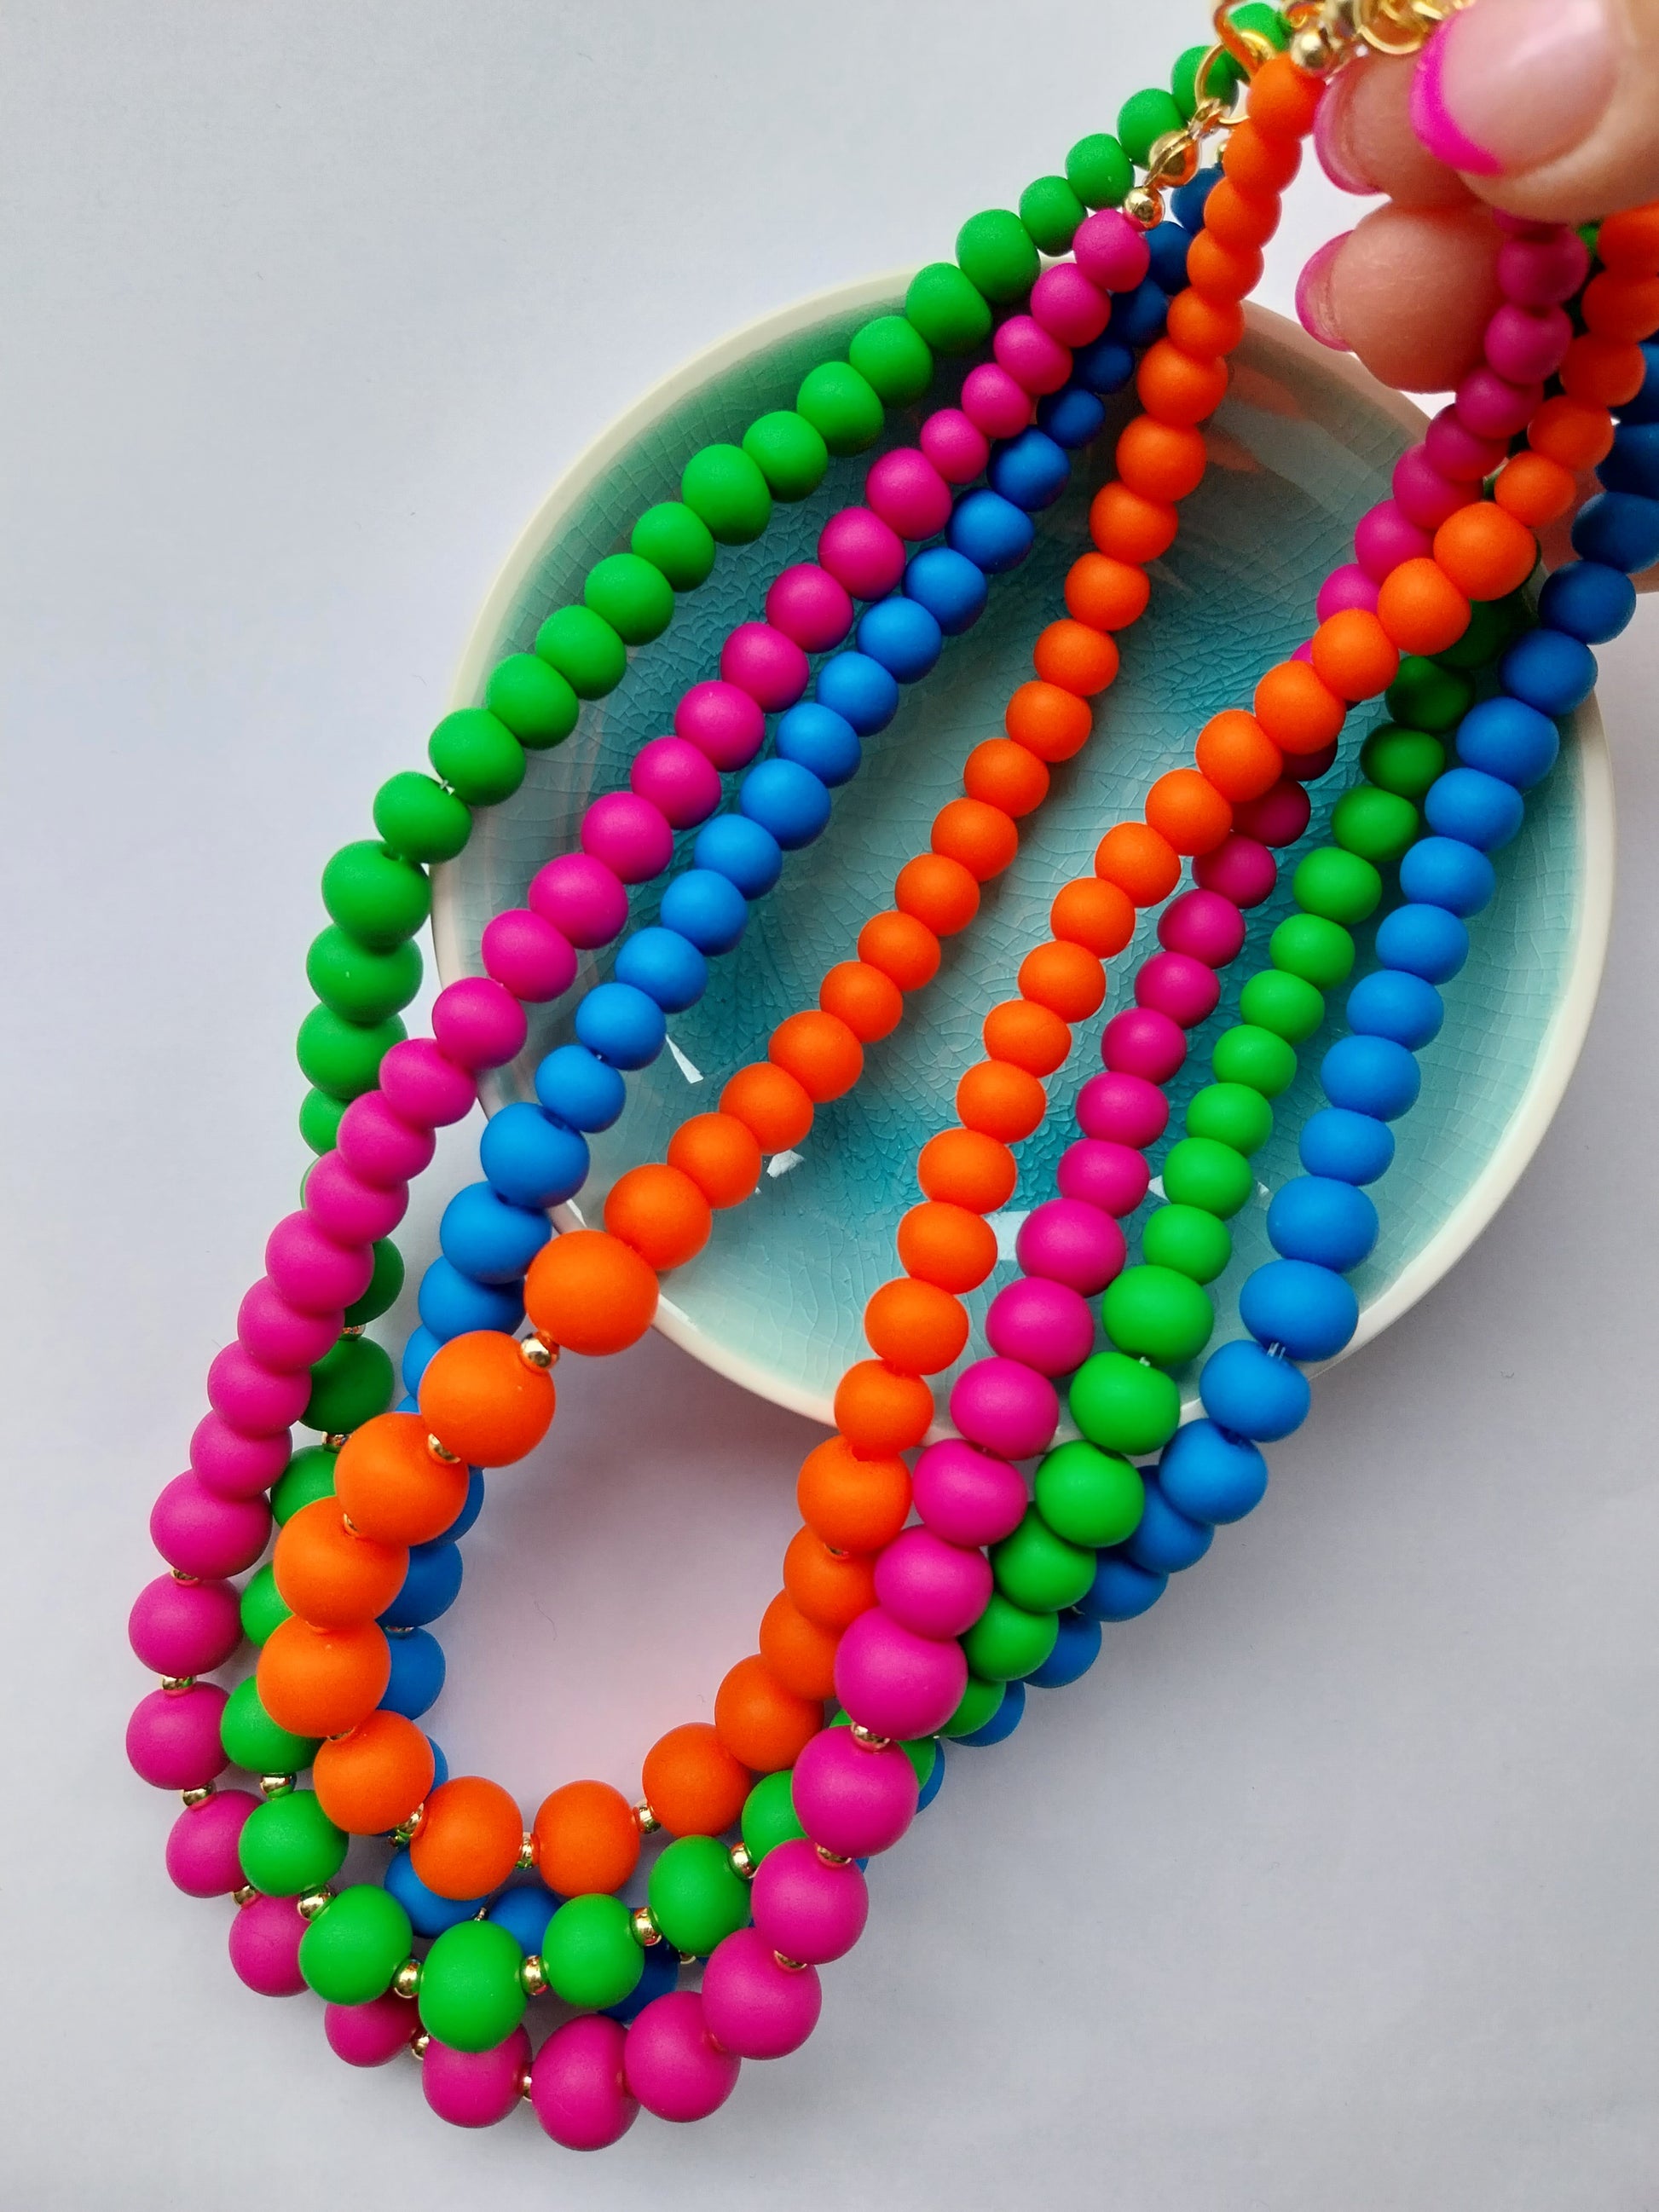 Vibrant clay bead necklaces in blue, orange, magenta and green